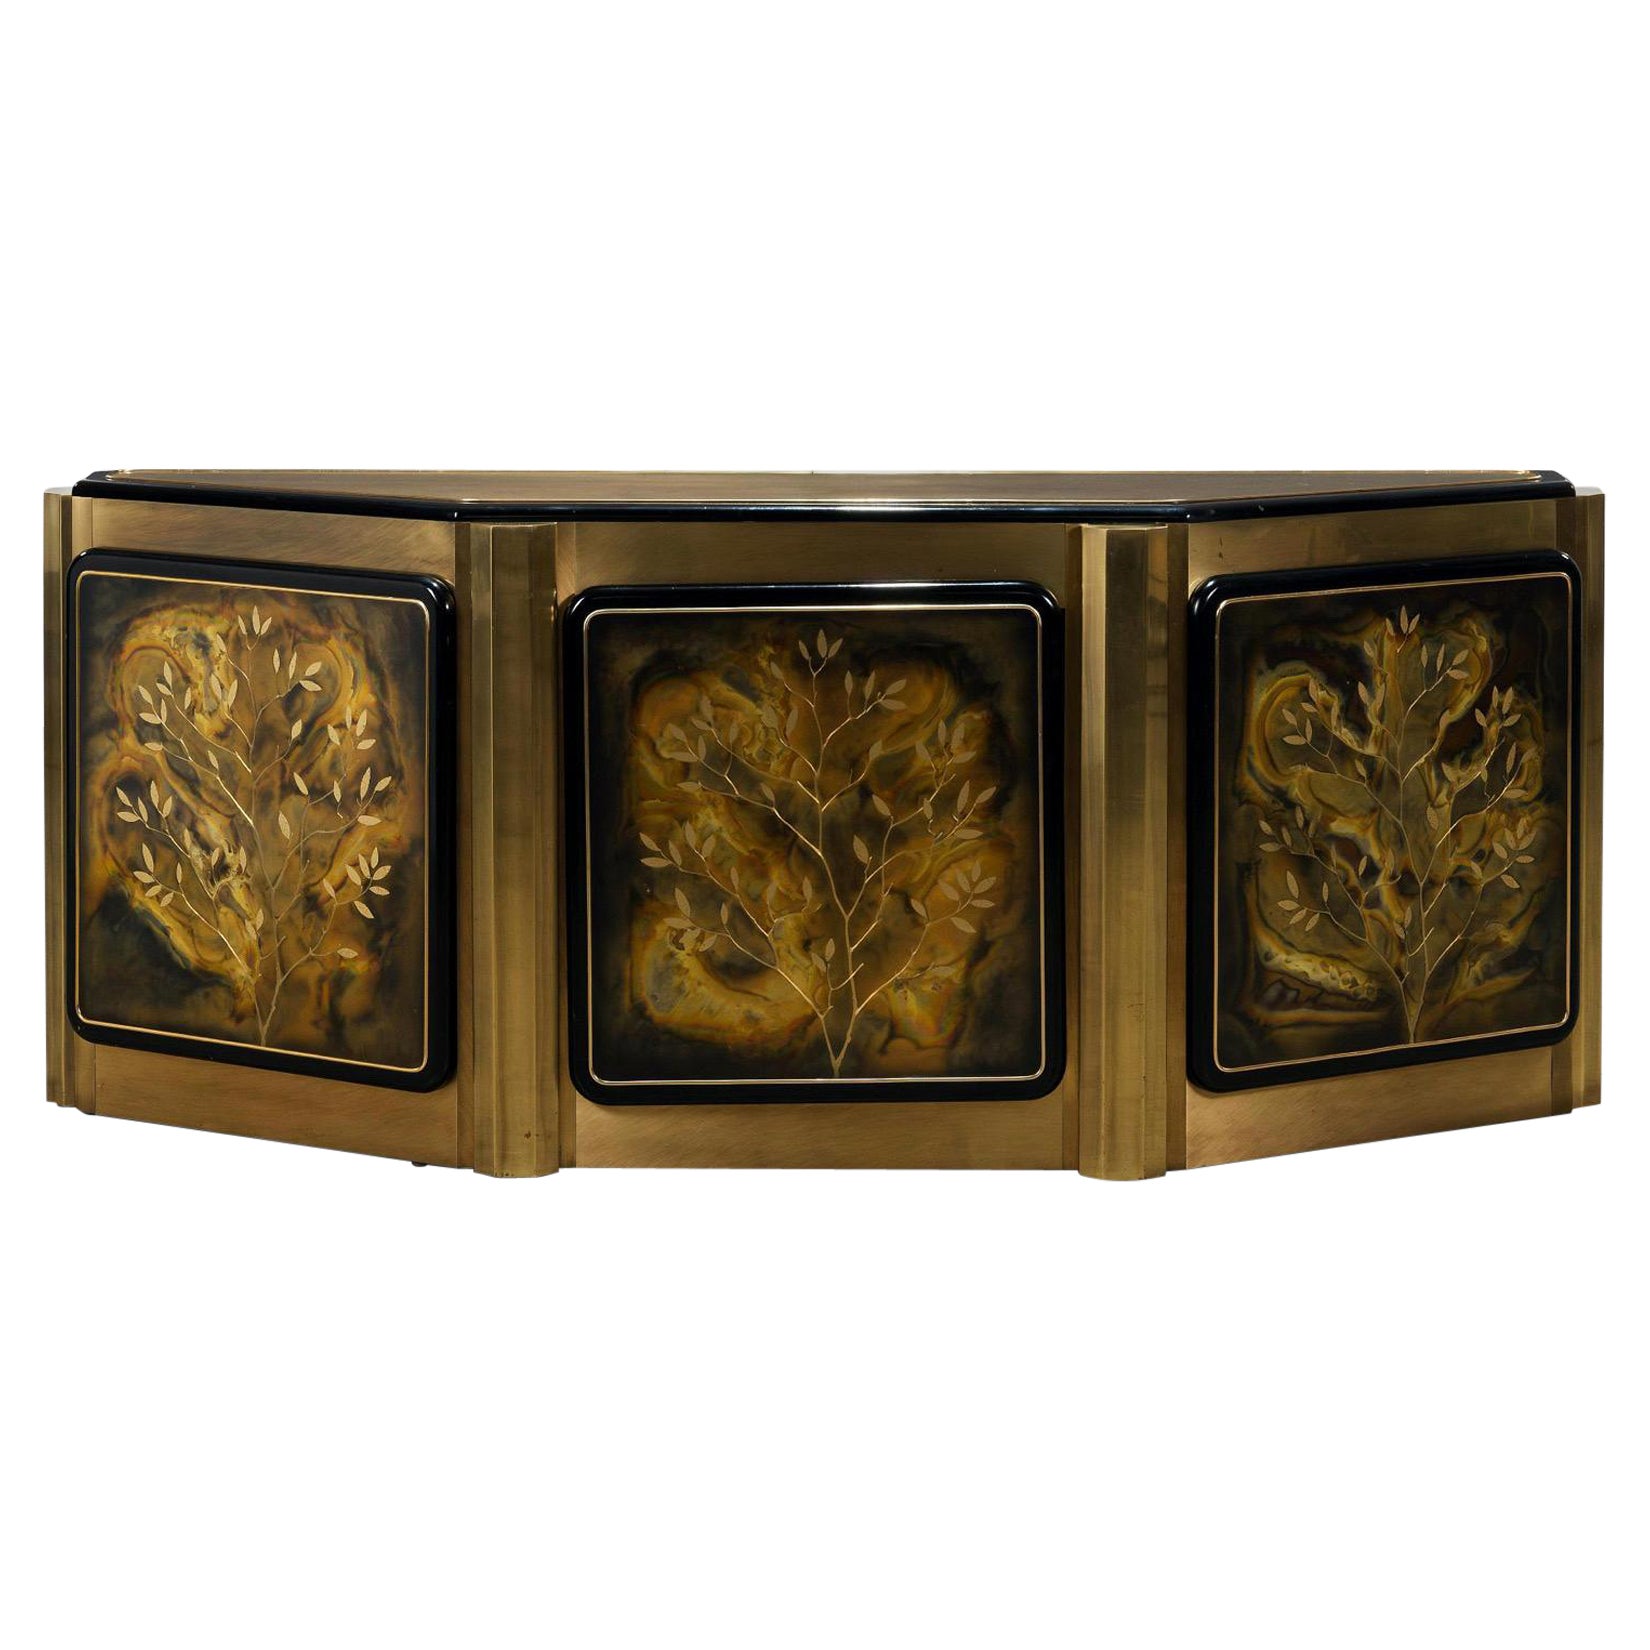 1970's Mastercraft "Tree Of Life" Acid Etched Brass Cabinet by Bernhard Rohne For Sale